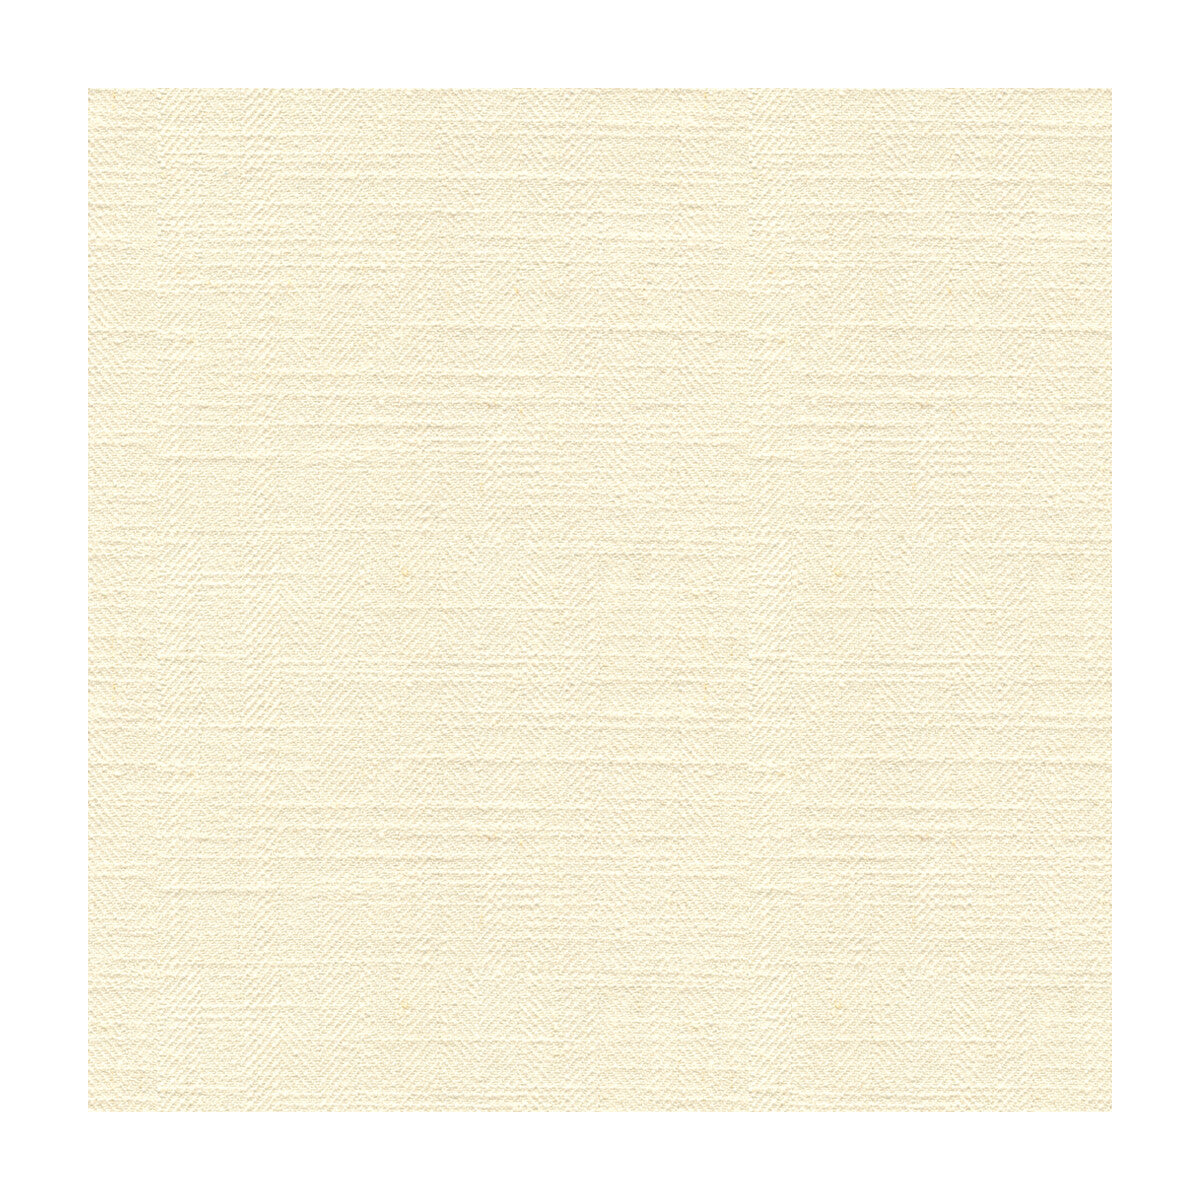 Kravet Basics fabric in 33842-101 color - pattern 33842.101.0 - by Kravet Basics in the Perfect Plains collection